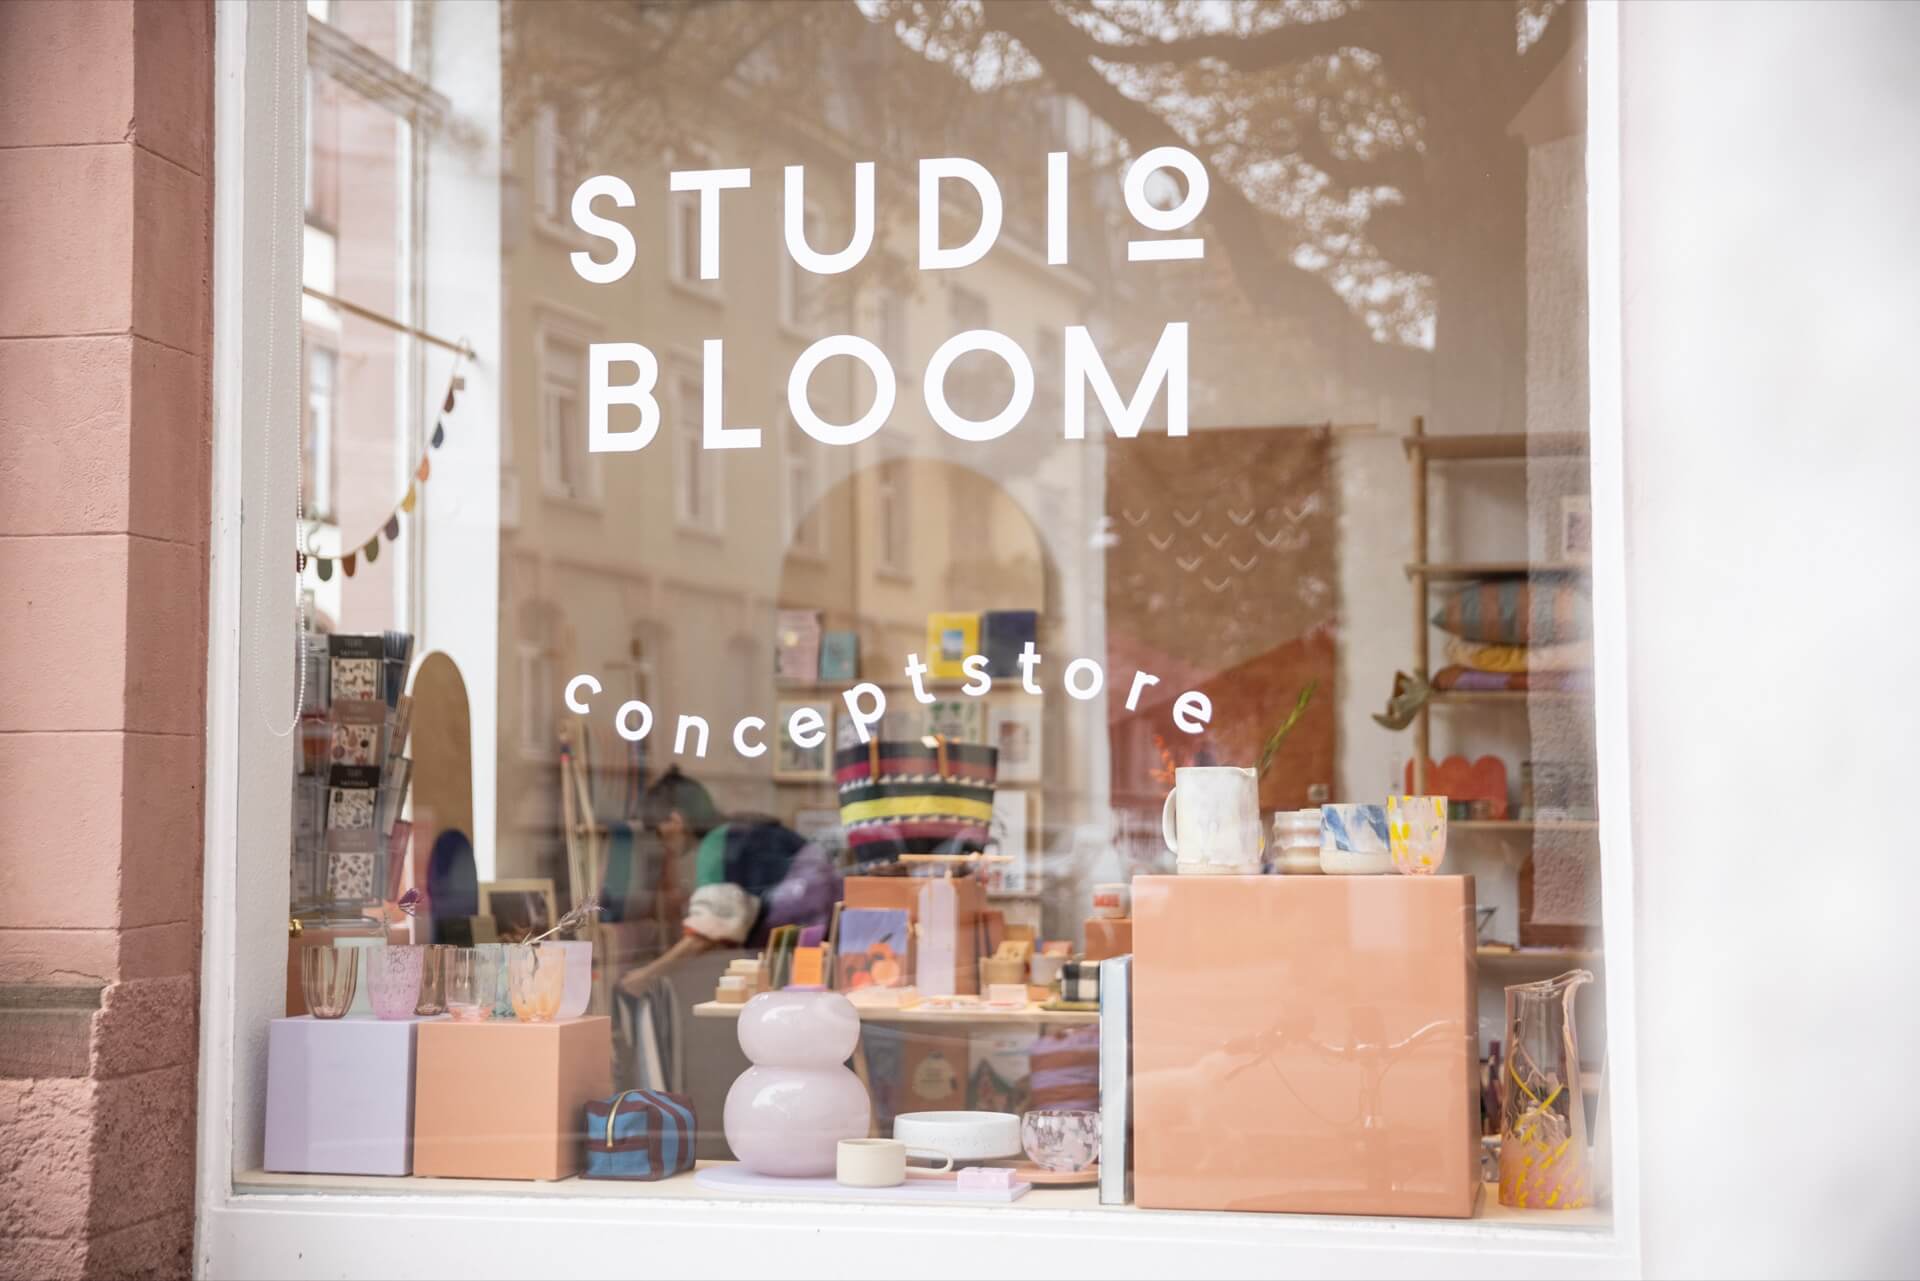 Inside lifestyle concept store Studio Bloom in Freiberg Germany